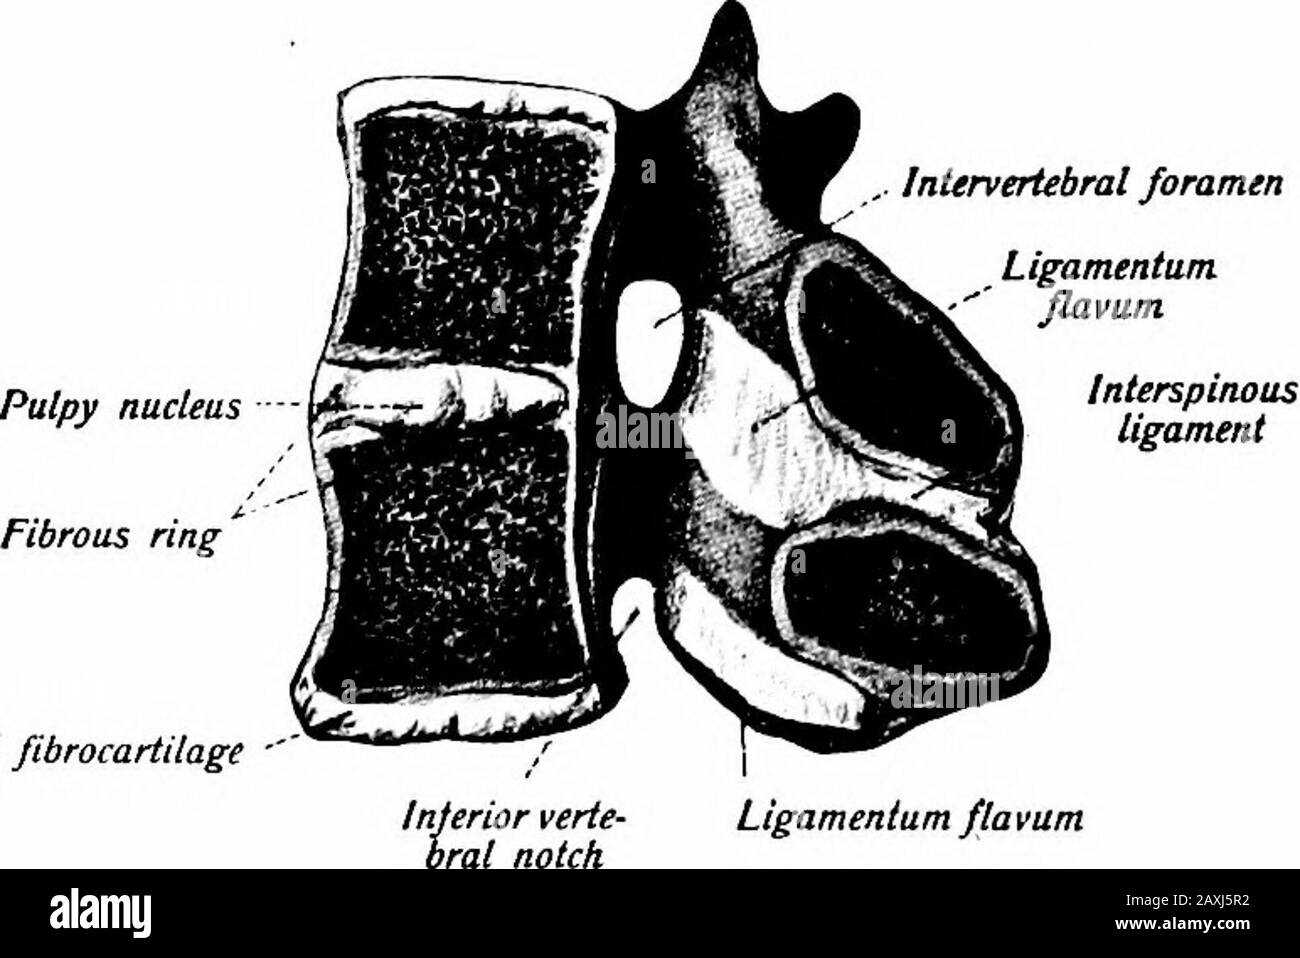 A manual of anatomy . Fig. 8o.—The ventral longitudinal lig-ament in the lower thoracic portion ofthe vertebral column, together with thecosto-vertebral ligaments seen from infront. {Sobotla and McMurrich.) Fig. 8i.—The dorsal longitudinal liga-ment in the lower thoracic and upperlumbar portions of the vertebral column.The vertebral arches have been removed.{Sobotta and McMurrich.) ,. Intervertebral foramen. Intervertebral fibrocartilage ? Ligamentum fla vam Fig. 82.—Two thoracic vertcbrze divided longitudinally in the median line and showing theligamenta flava. (Sobotta and McMurrich.) LIGAME Stock Photo